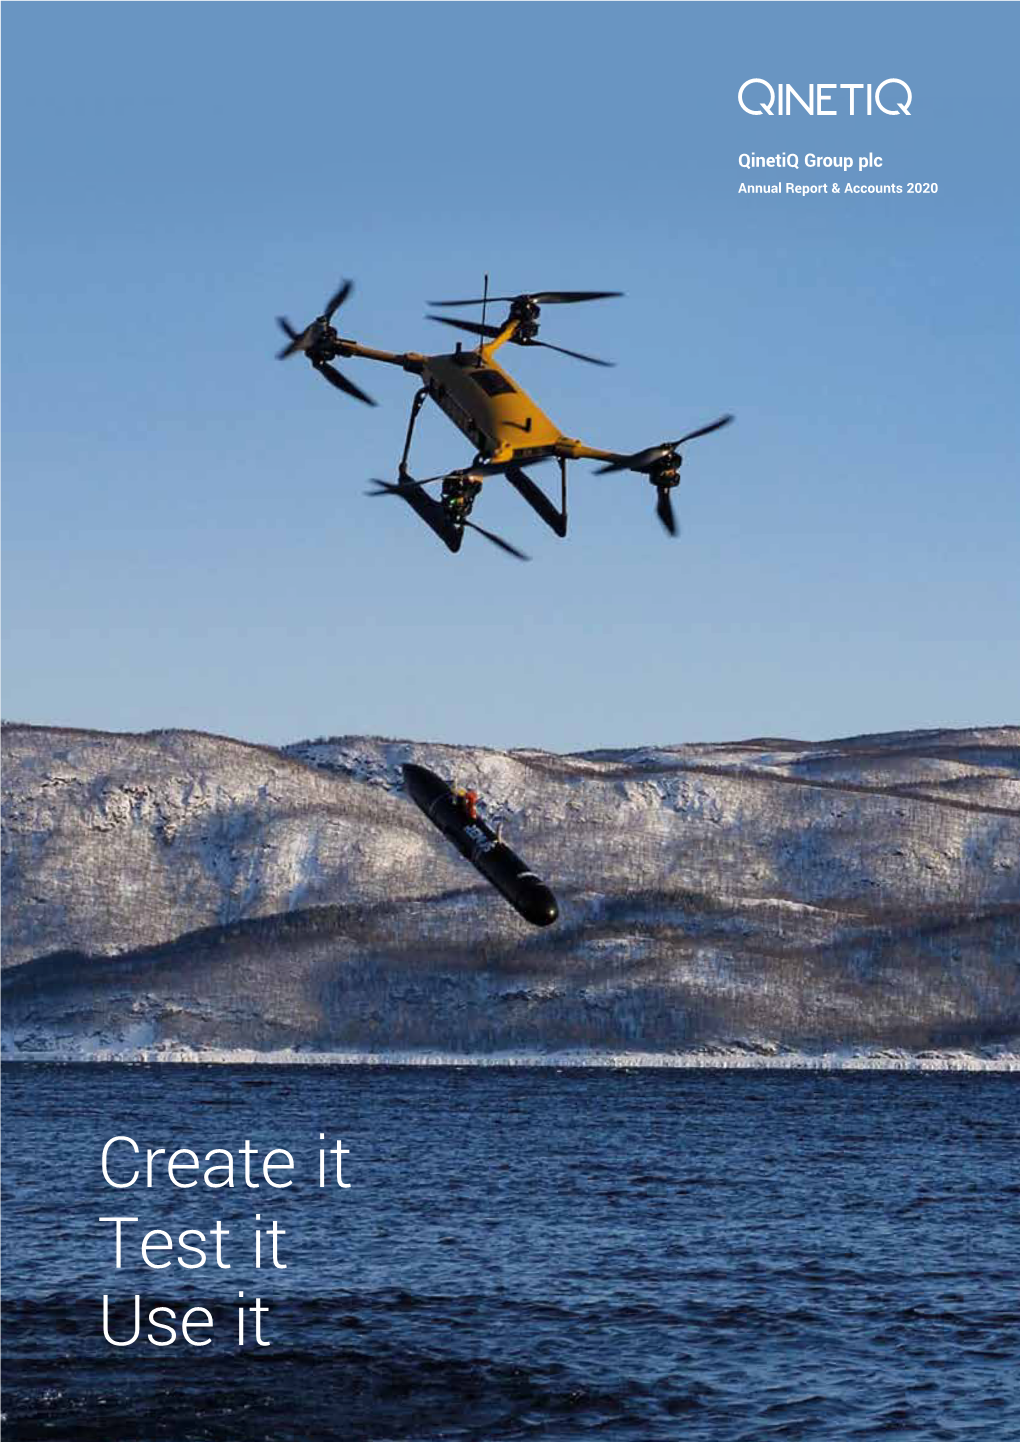 Create It Test It Use It Our Purpose Qinetiq Is Dedicated to Protecting Lives, Defending Sovereign Capability and Securing the Vital Interests of Our Customers